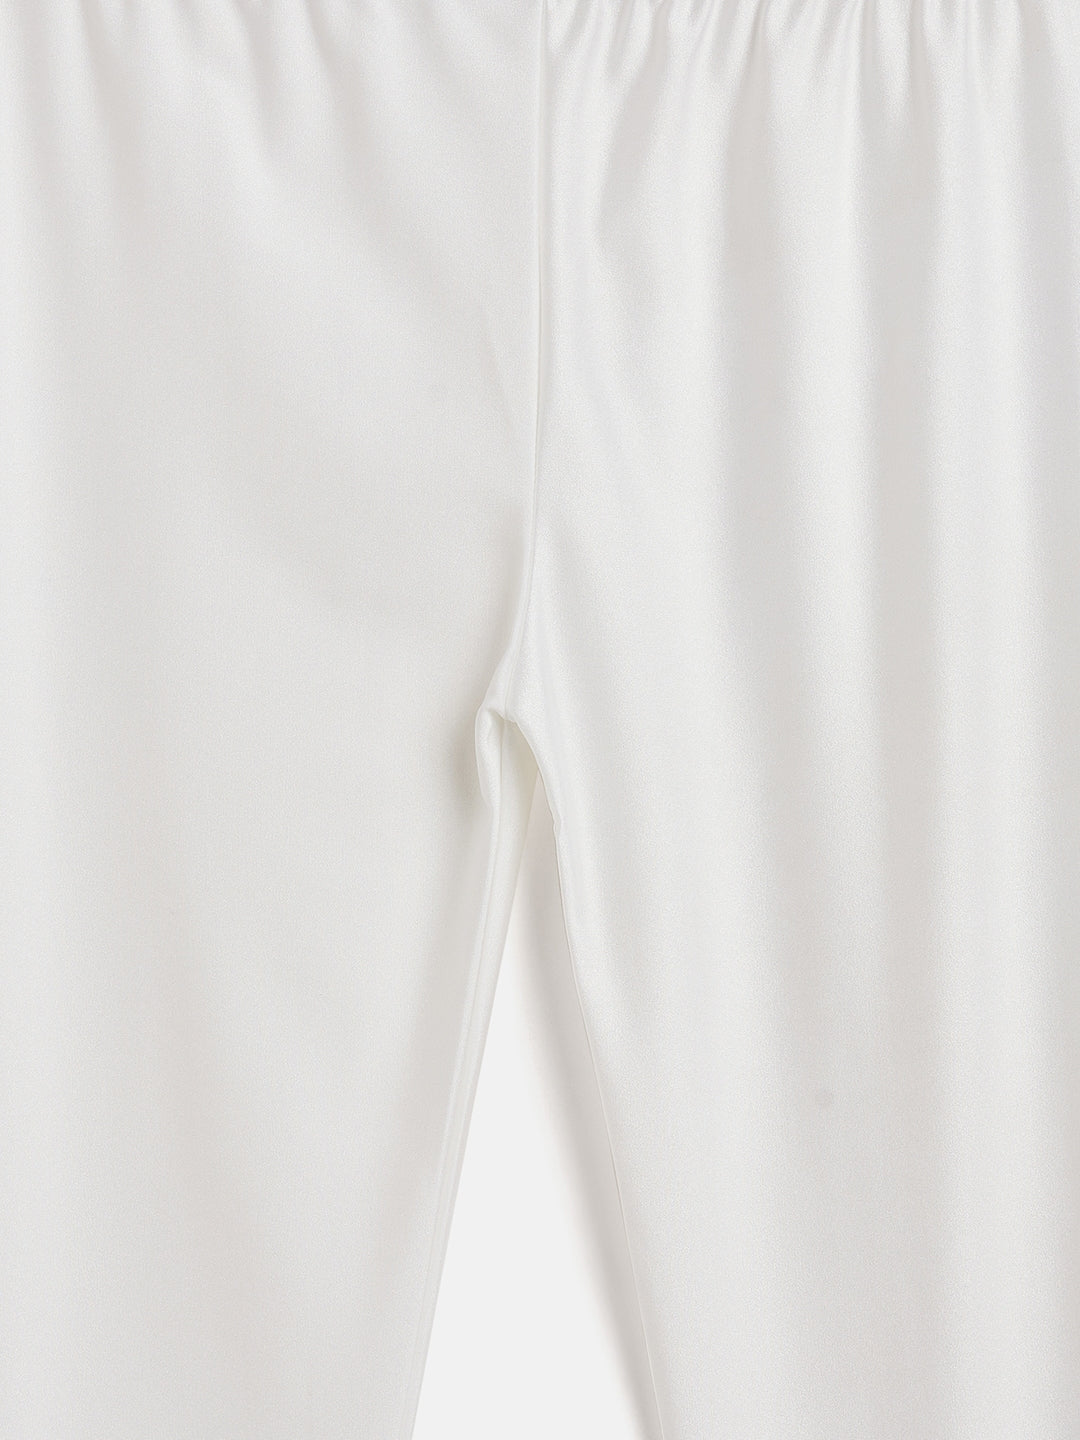 White Viscose Ankle Legging  Shop Now – The Pajama Factory